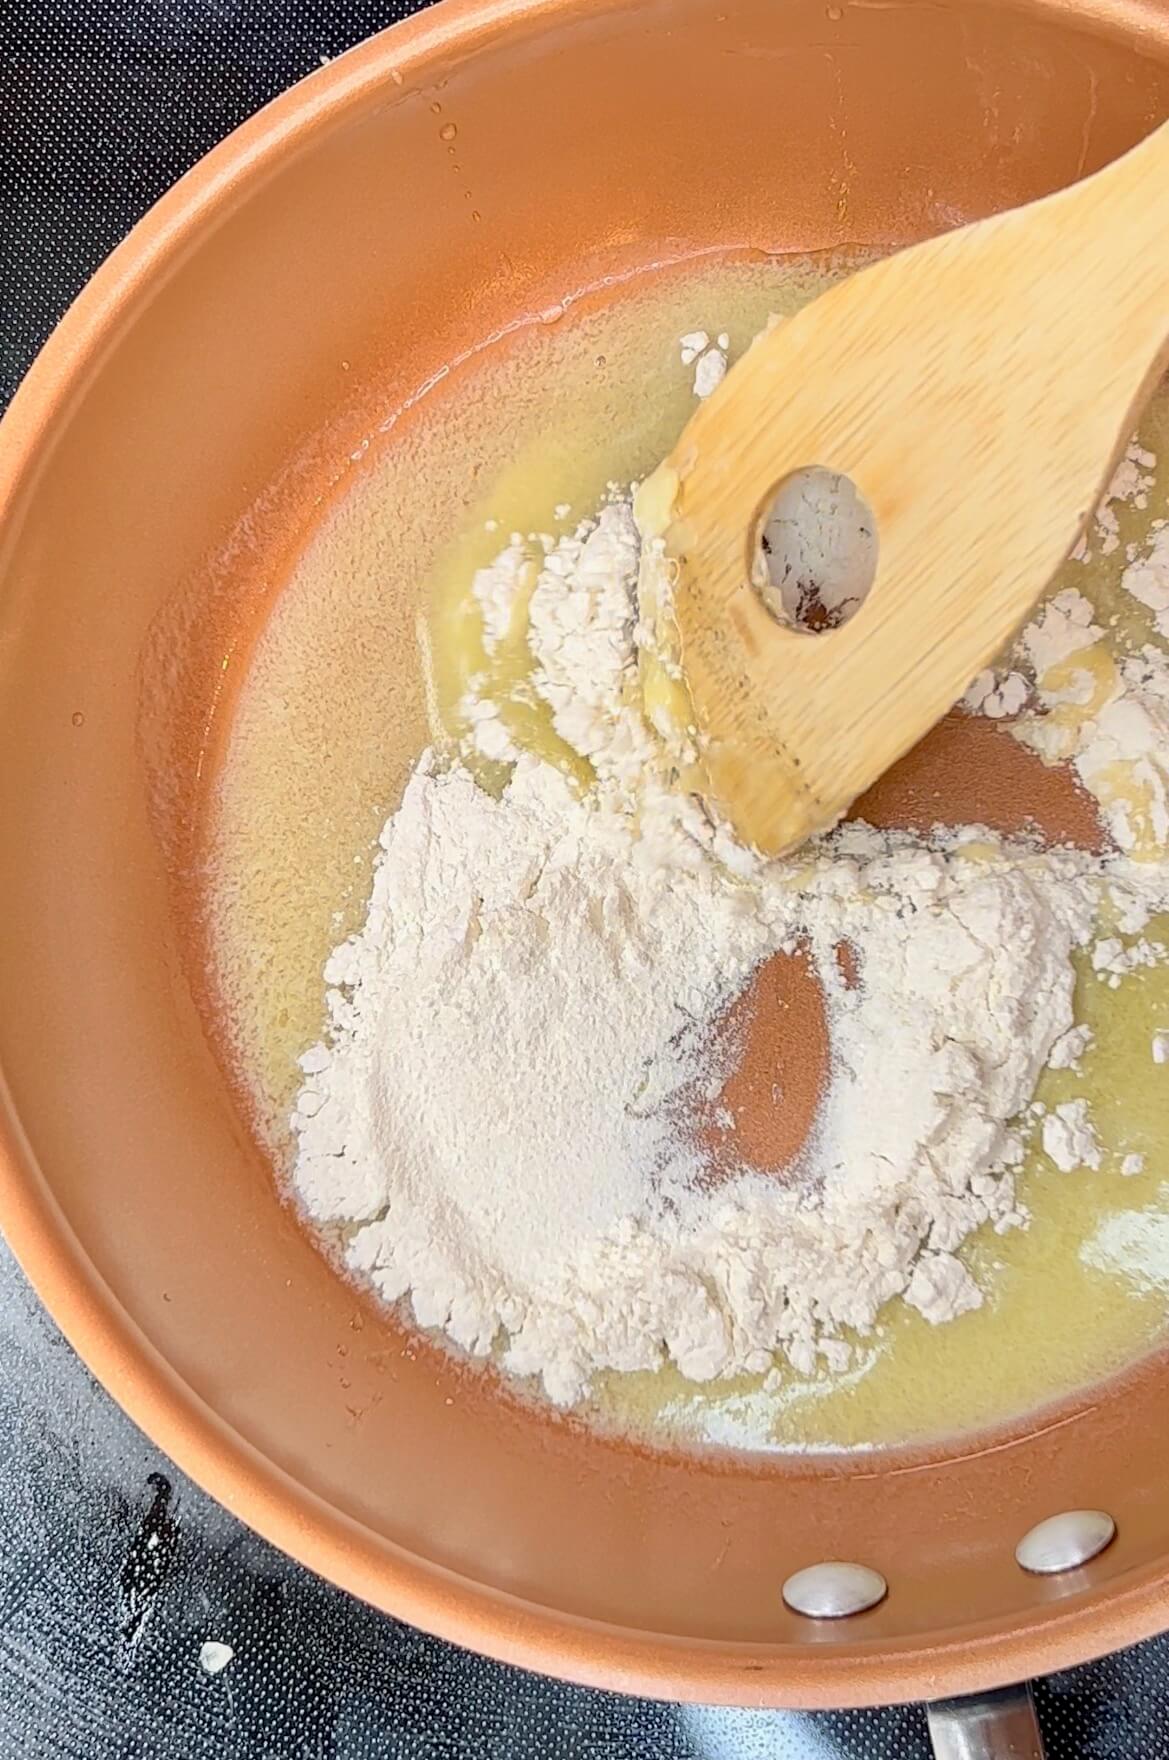 Add flour to the melted butter